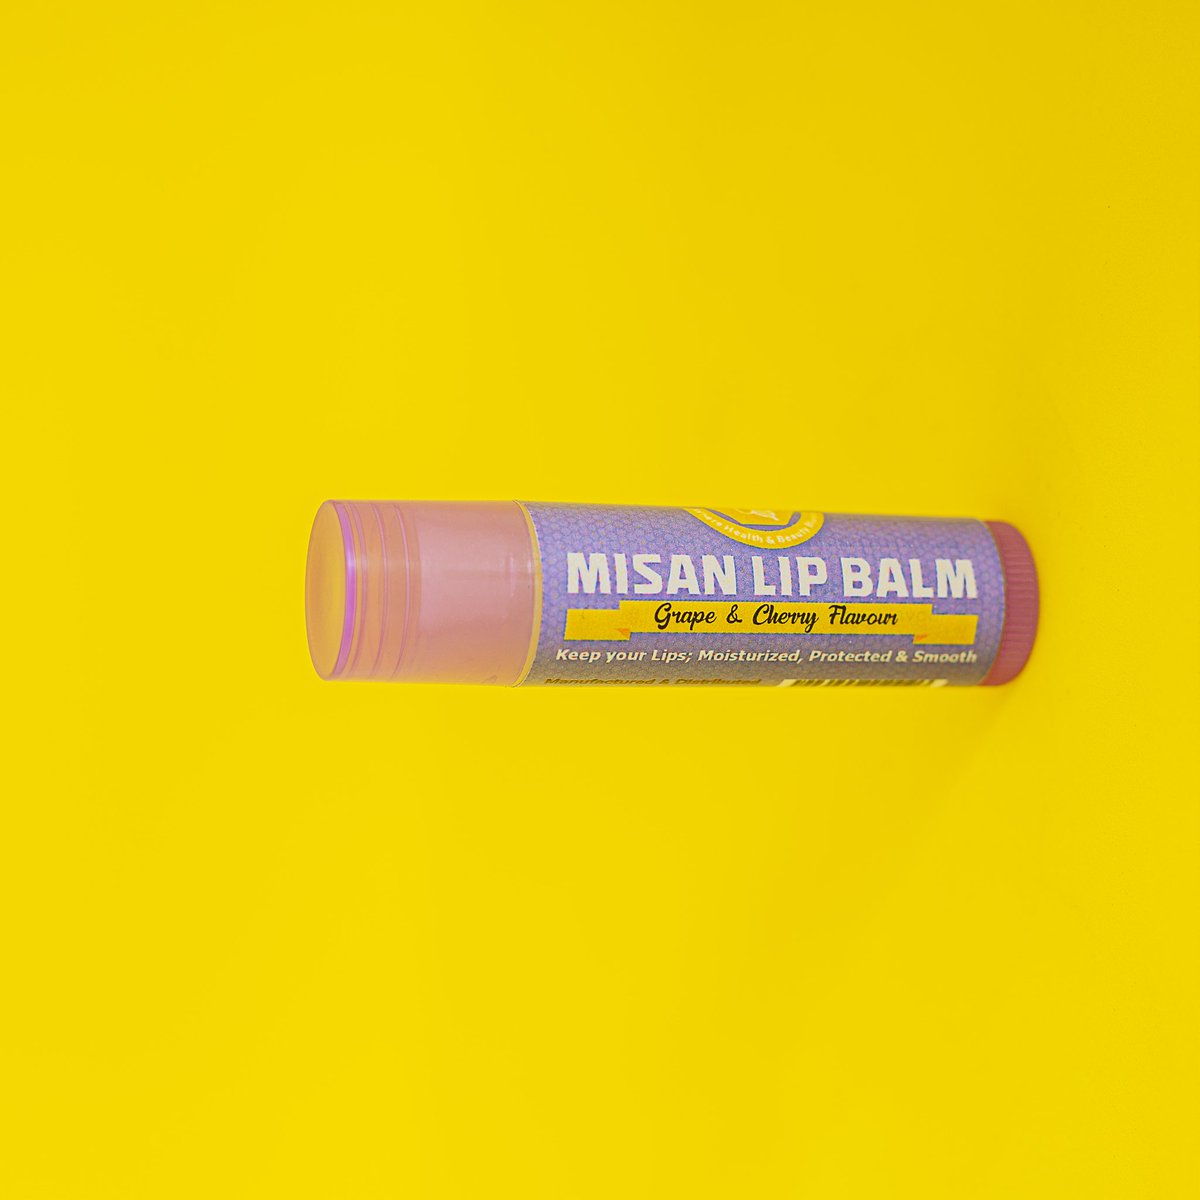 Misan Lip Balm ; the hero of your bedtime beauty routine, keeping your Lips Moisturized, Protected & Smooth   #Grape & #Cherry Flavour #MisanBees🐝 #LipTherapy  #NaturalLipBalm #MisanLipBalm
📲+255657376858